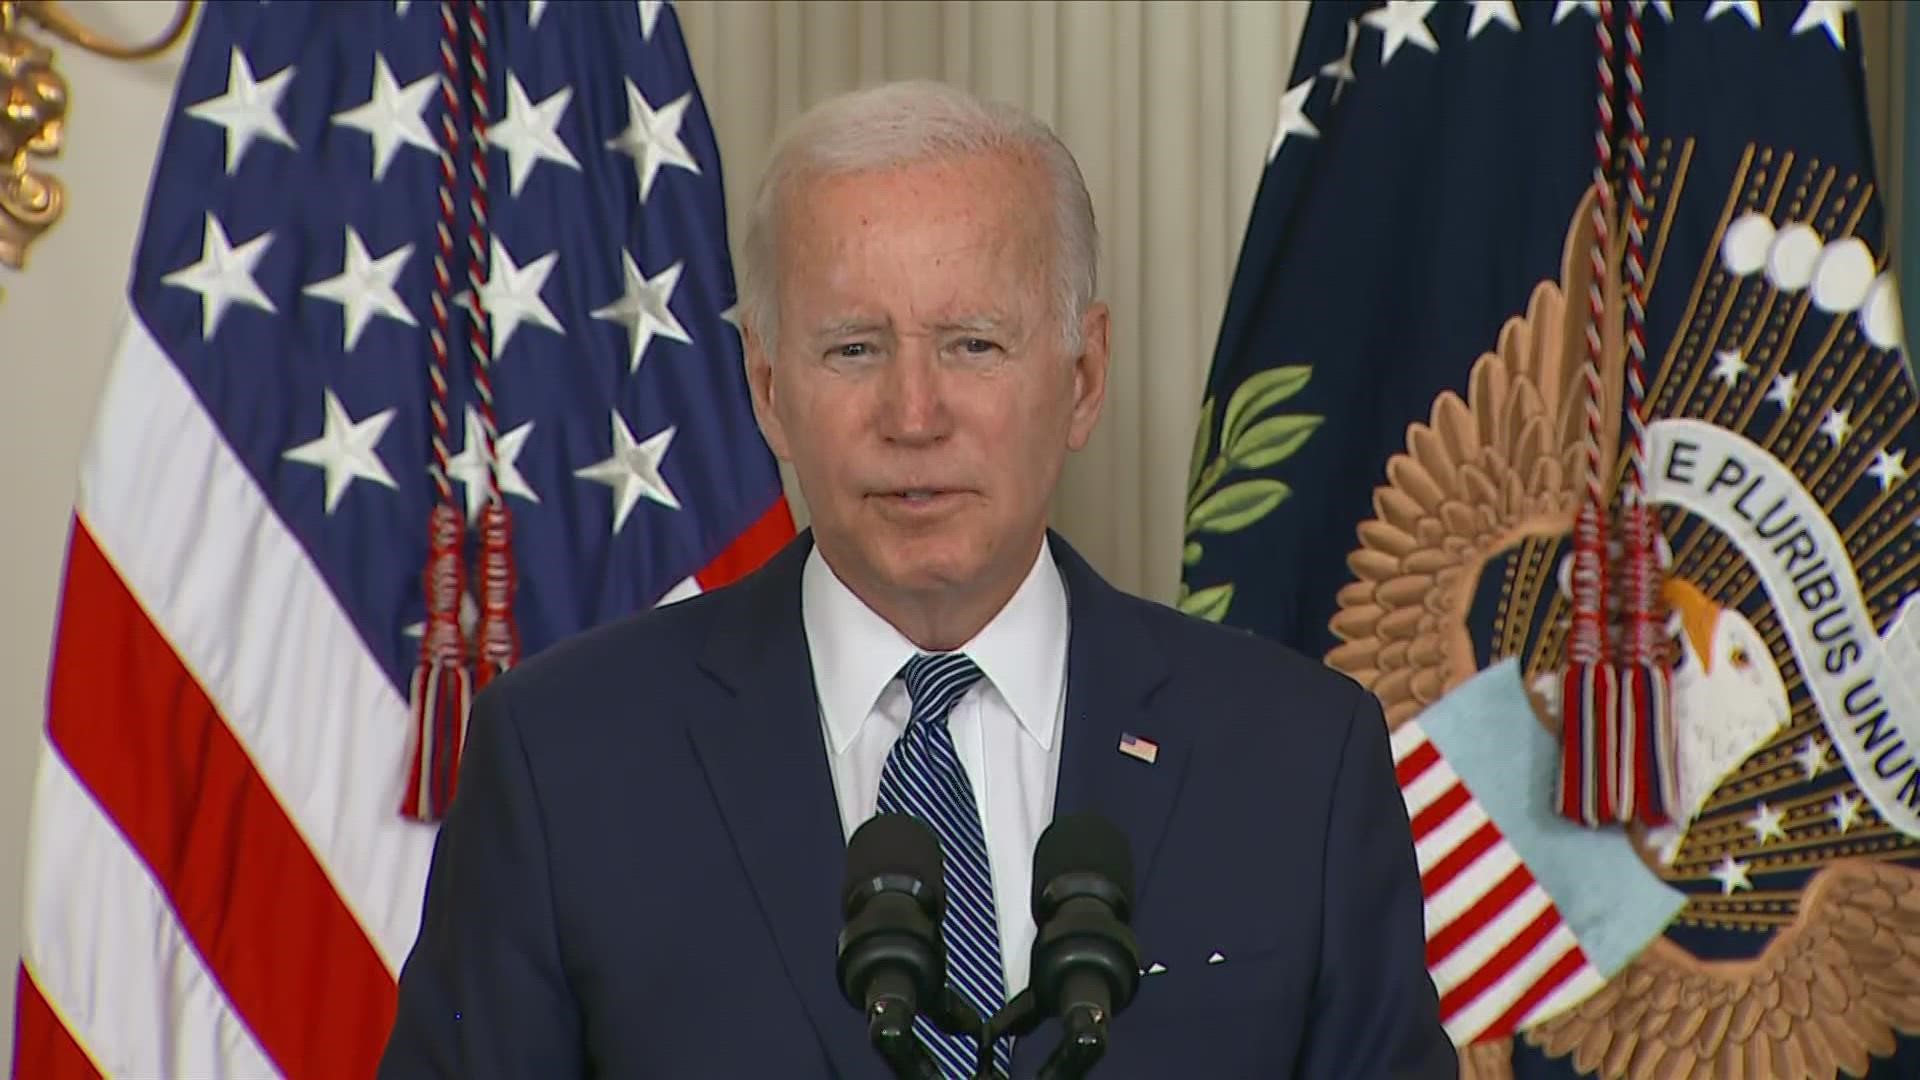 President Biden signed the Inflation Reduction Act on Tuesday, a transformative bill aiming to combat climate change and lower healthcare costs.